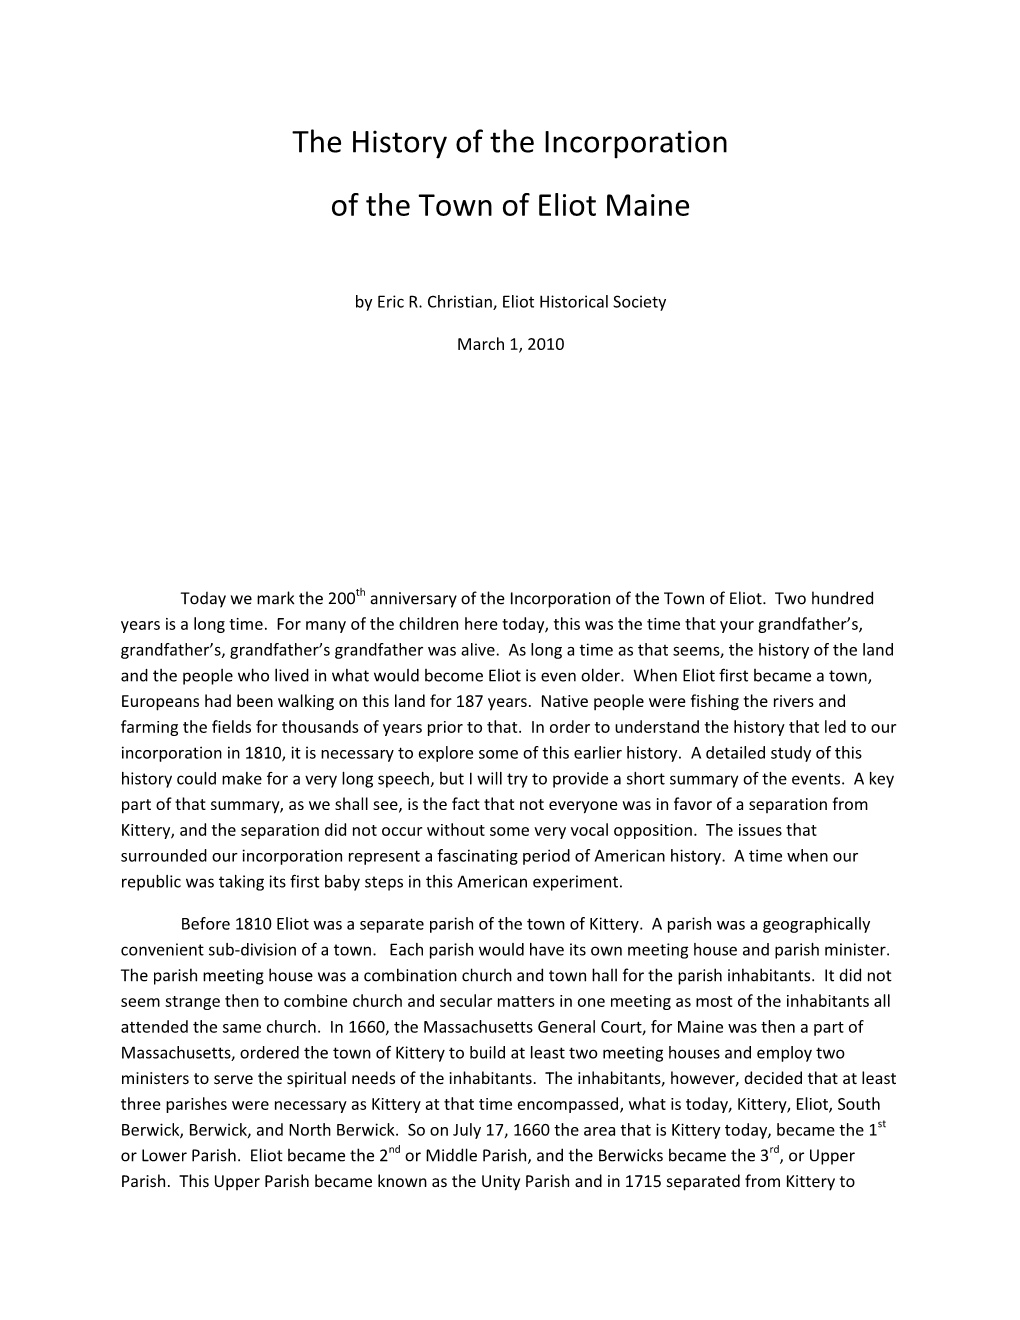 The History of the Incorporation of the Town of Eliot Maine